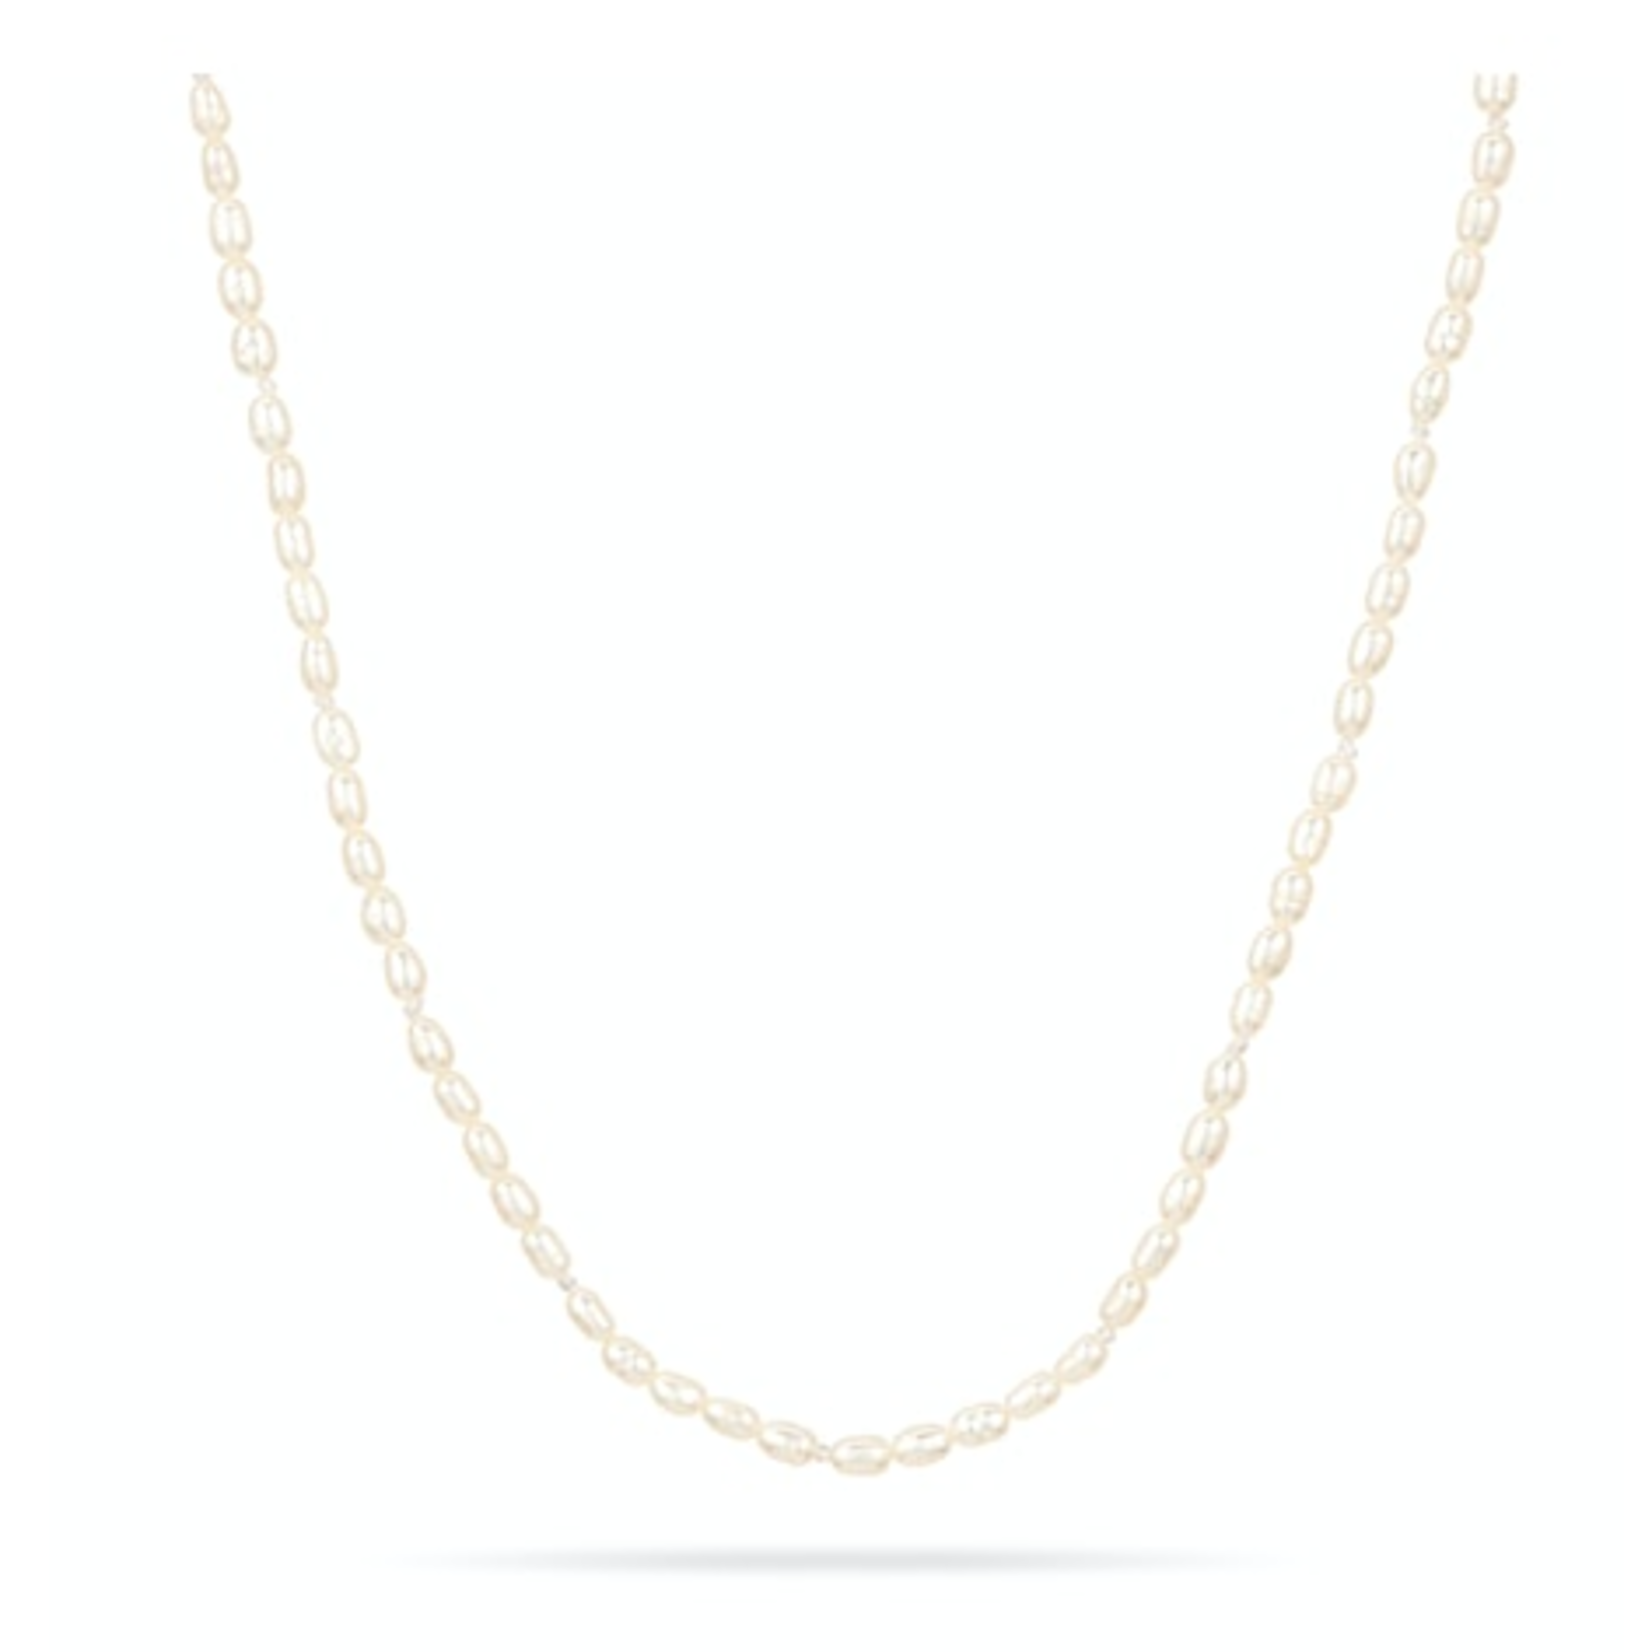 Tiny Seed Pearl Necklace - Y14